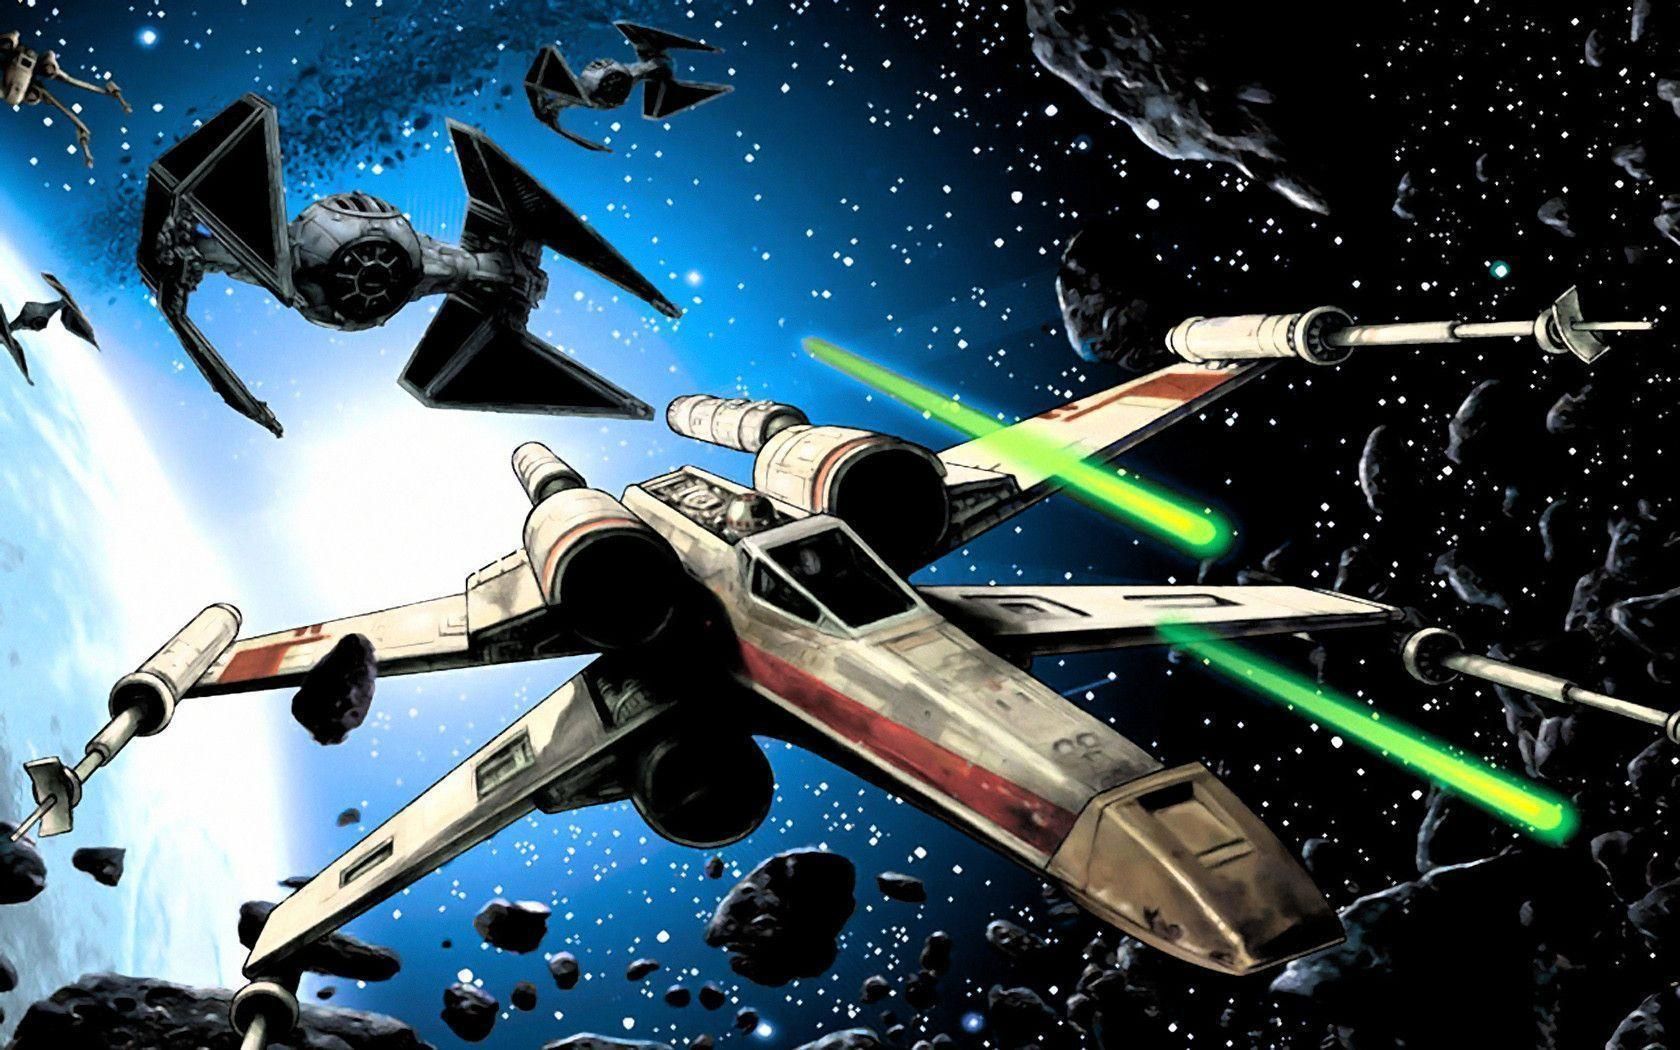 wing wars star xwing fighter tie wallpaper vs background fighters dogfight space spaceship intercepto. Star wars wallpaper, Star wars spaceships, Star wars ships